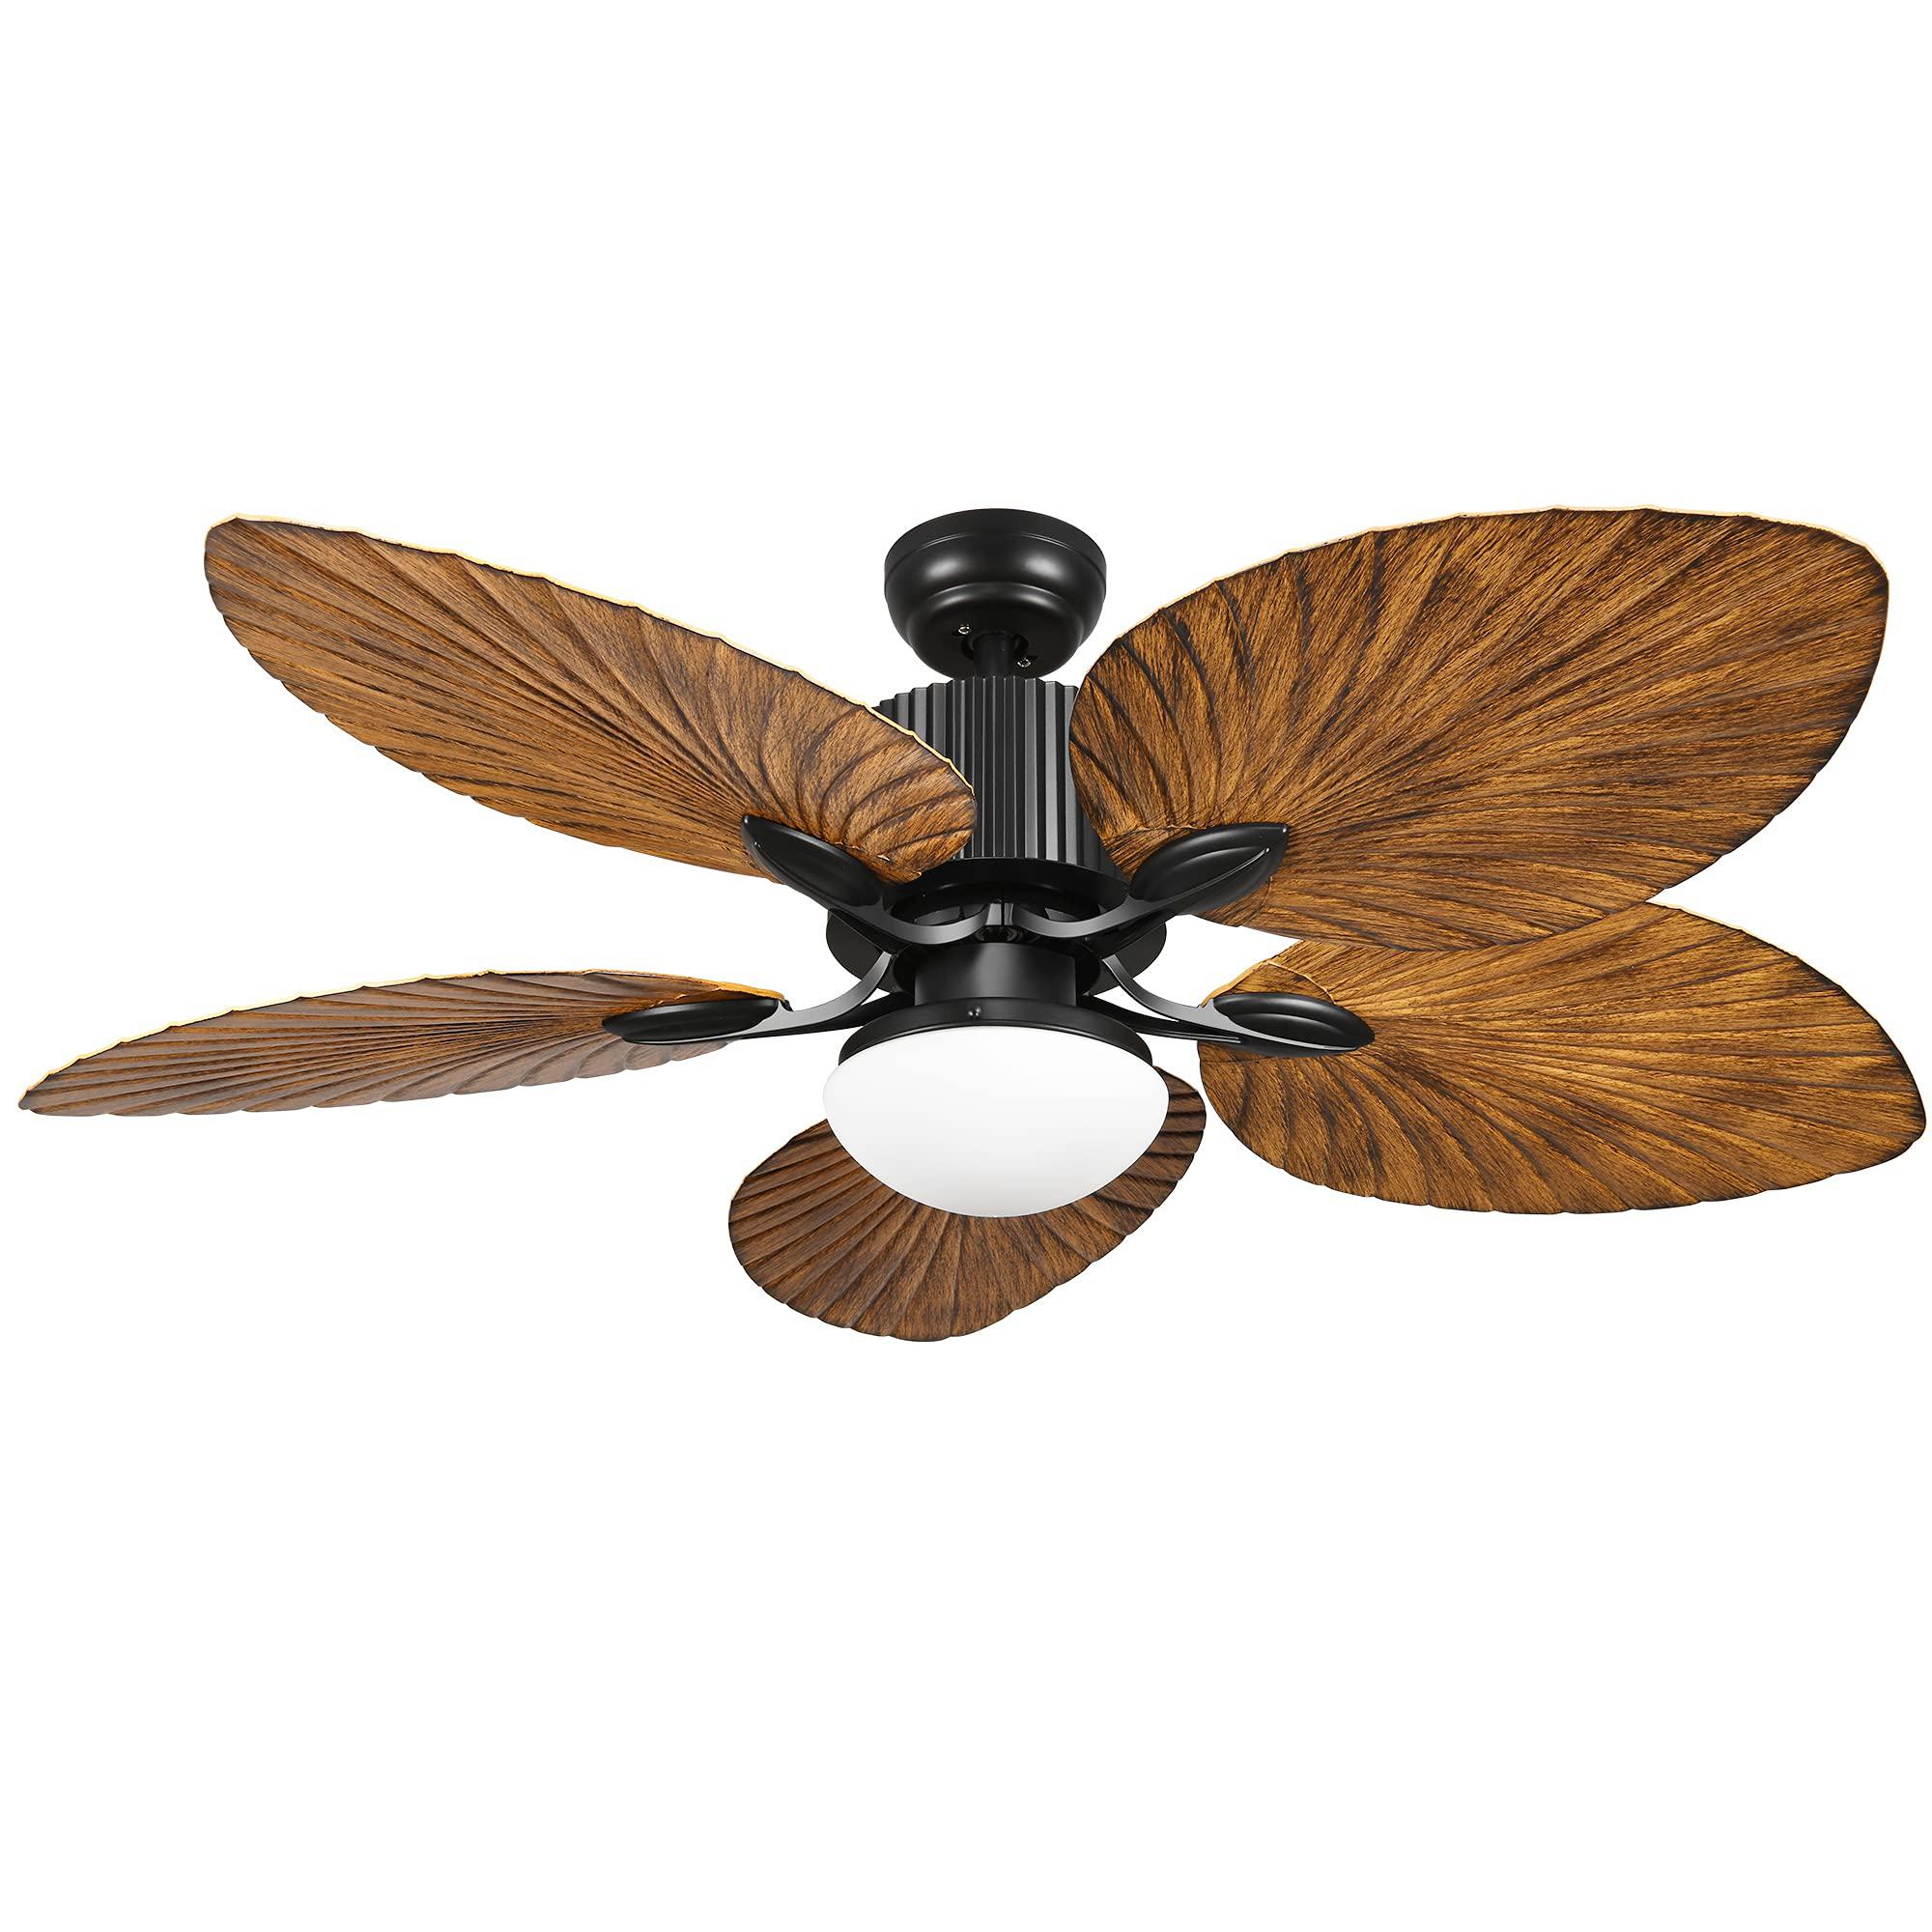 yitahome tropical ceiling fan with led light and remote control 52 inch palm reversible fan light with memory function 5 leaf